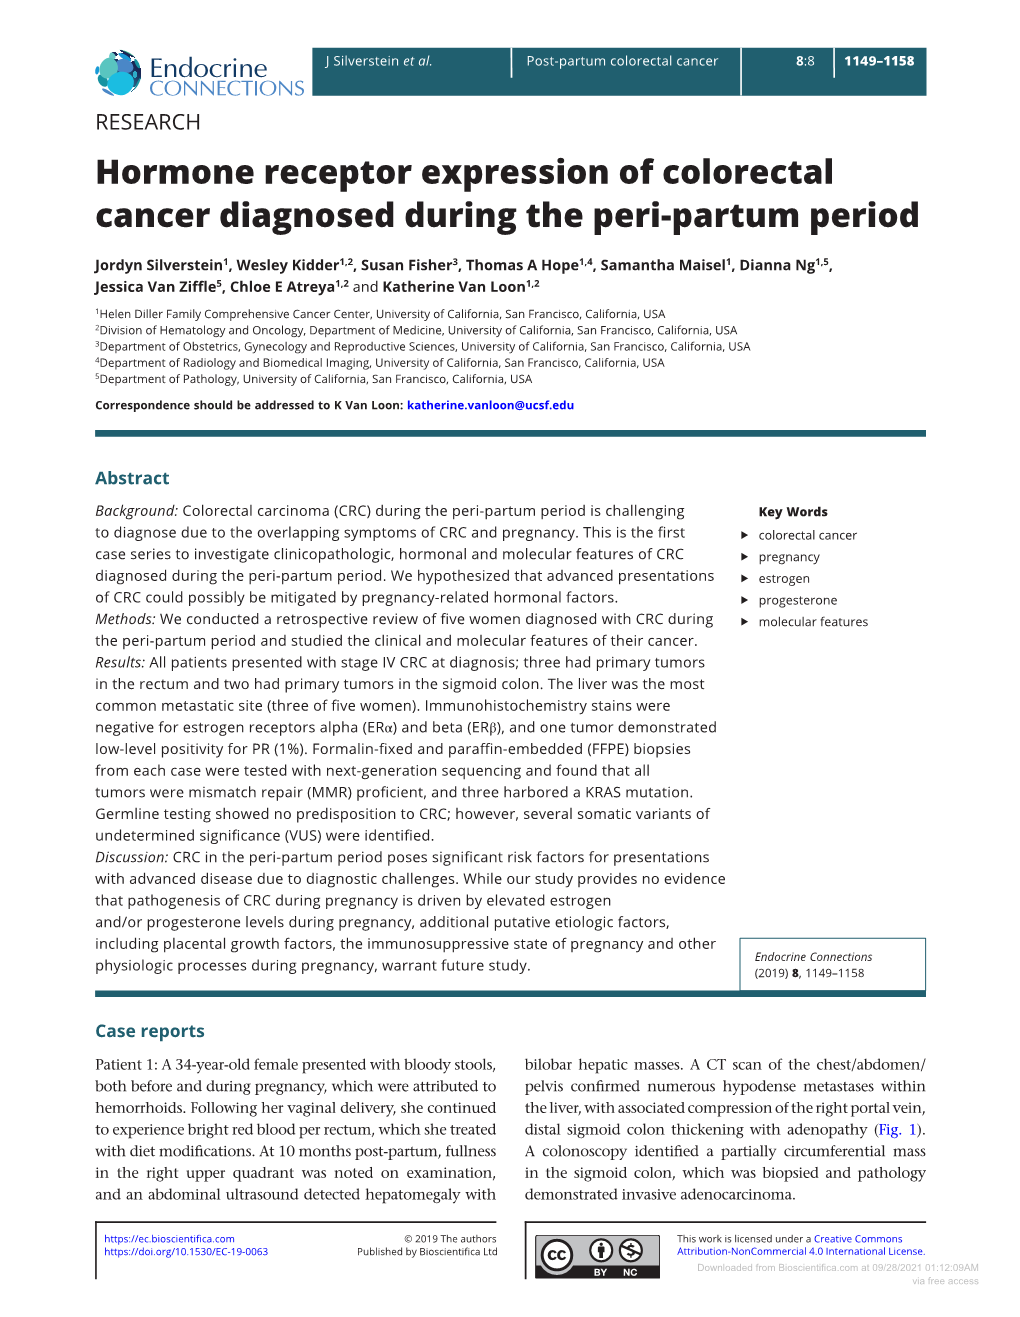 Hormone Receptor Expression of Colorectal Cancer Diagnosed During the Peri-Partum Period